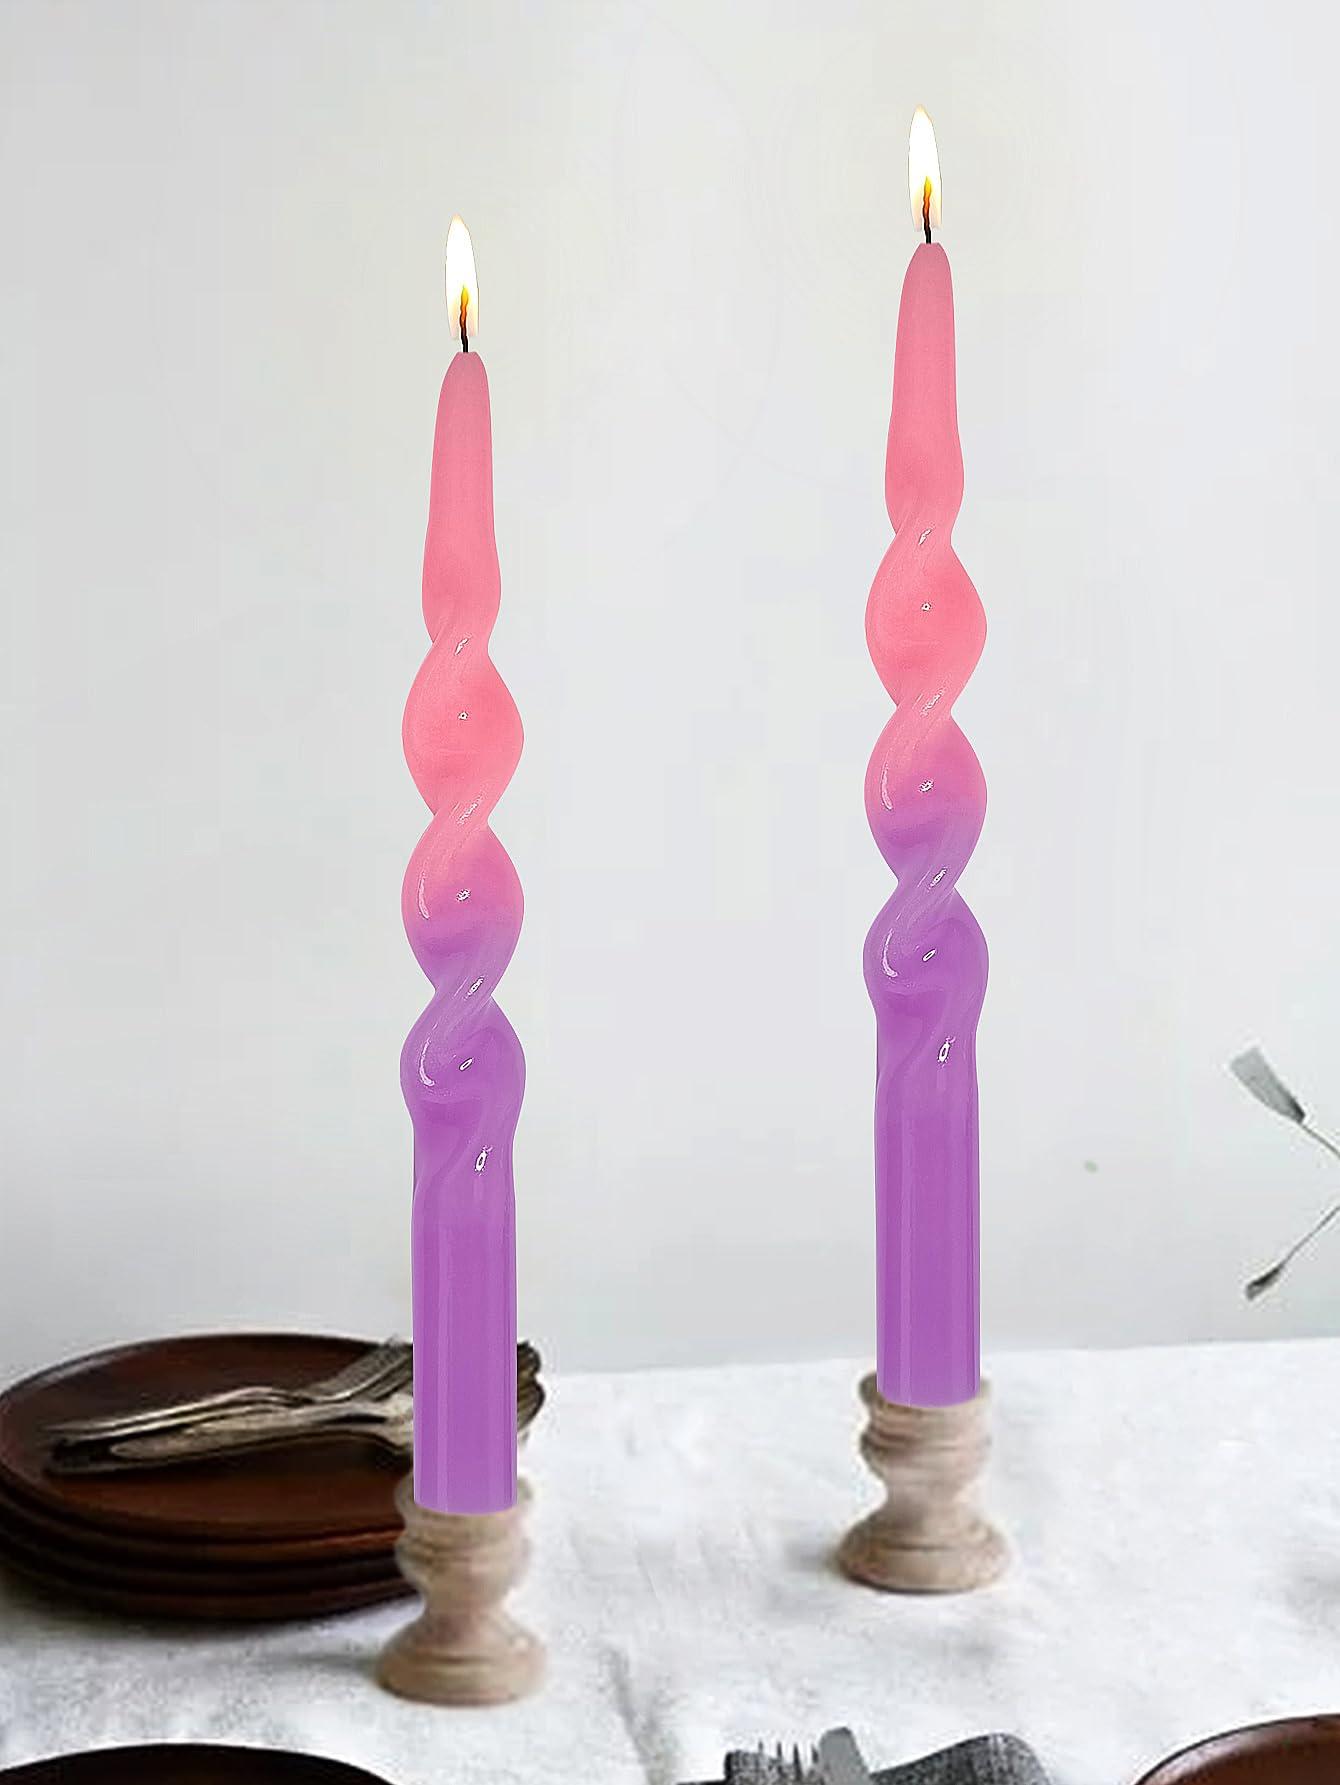 Gedengni 10inches Spiral Taper Candles Pink Purple Candlesticks - Twisted Tapered Candle Sticks 2PCS Unscented Smokeless Candles for Decoration Wedding Dinner 1